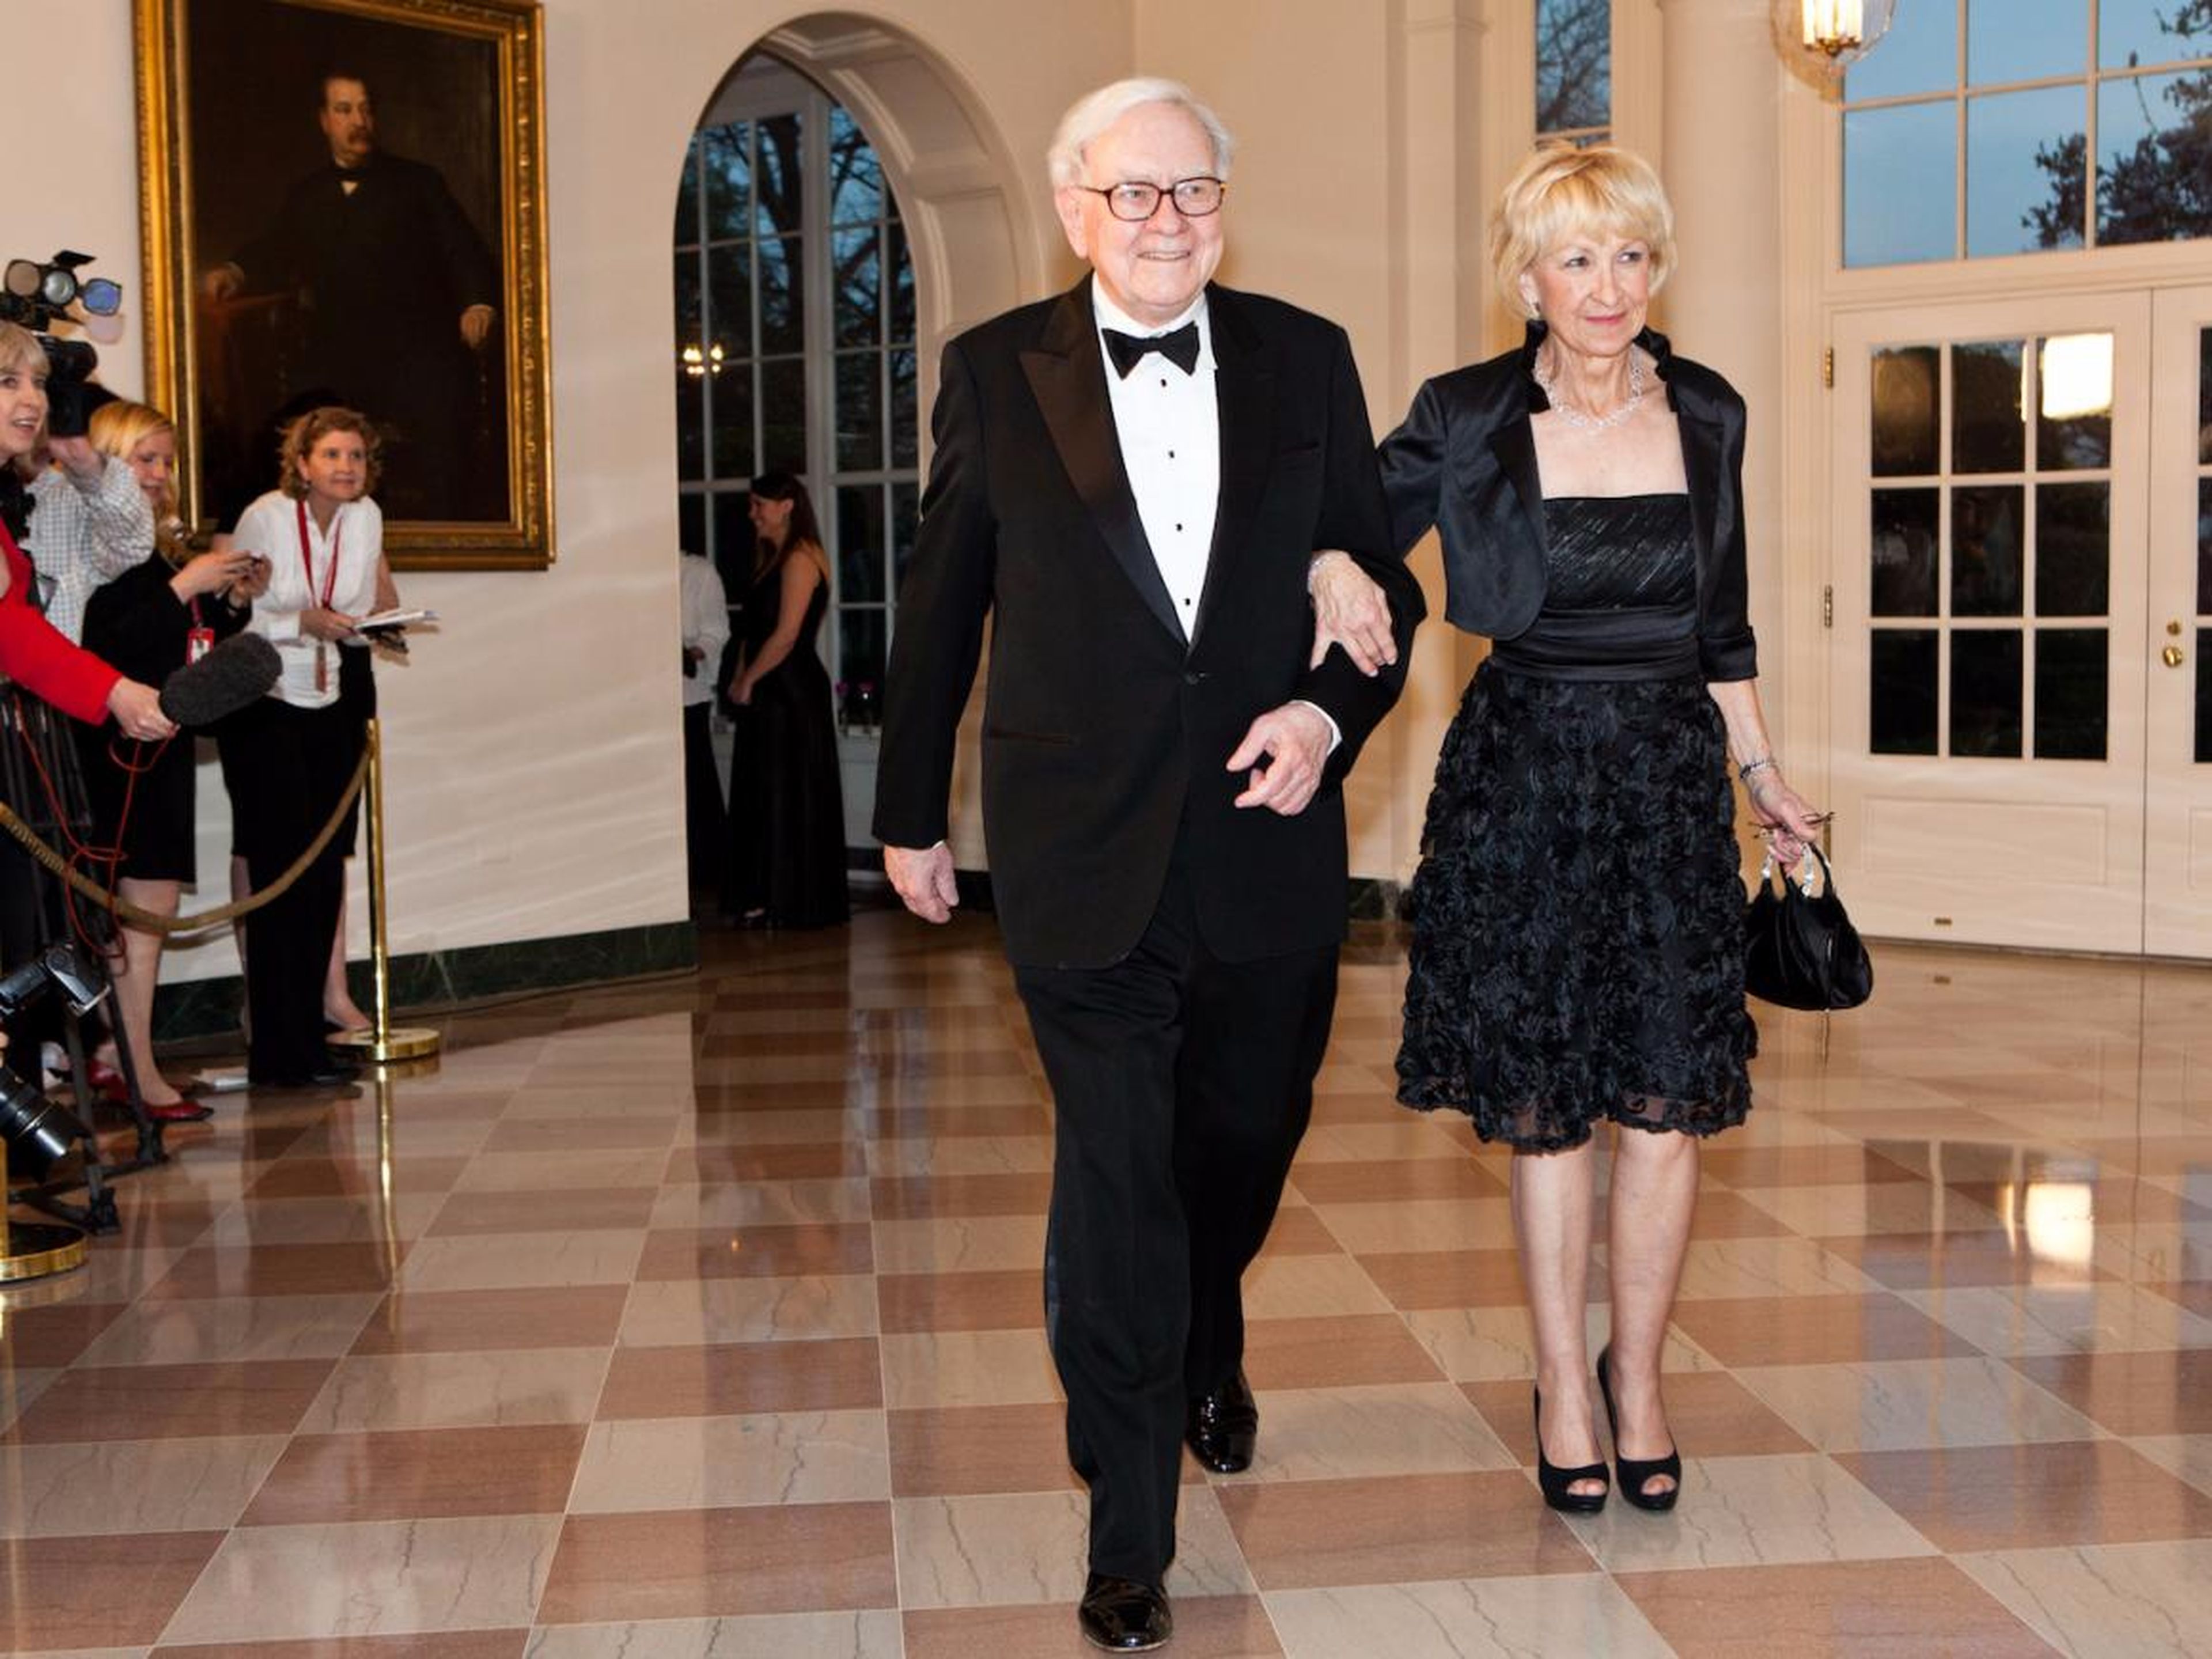 Buffett once spent $100 to take a Dale Carnegie course on public speaking. It helped him propose to his wife, he said.